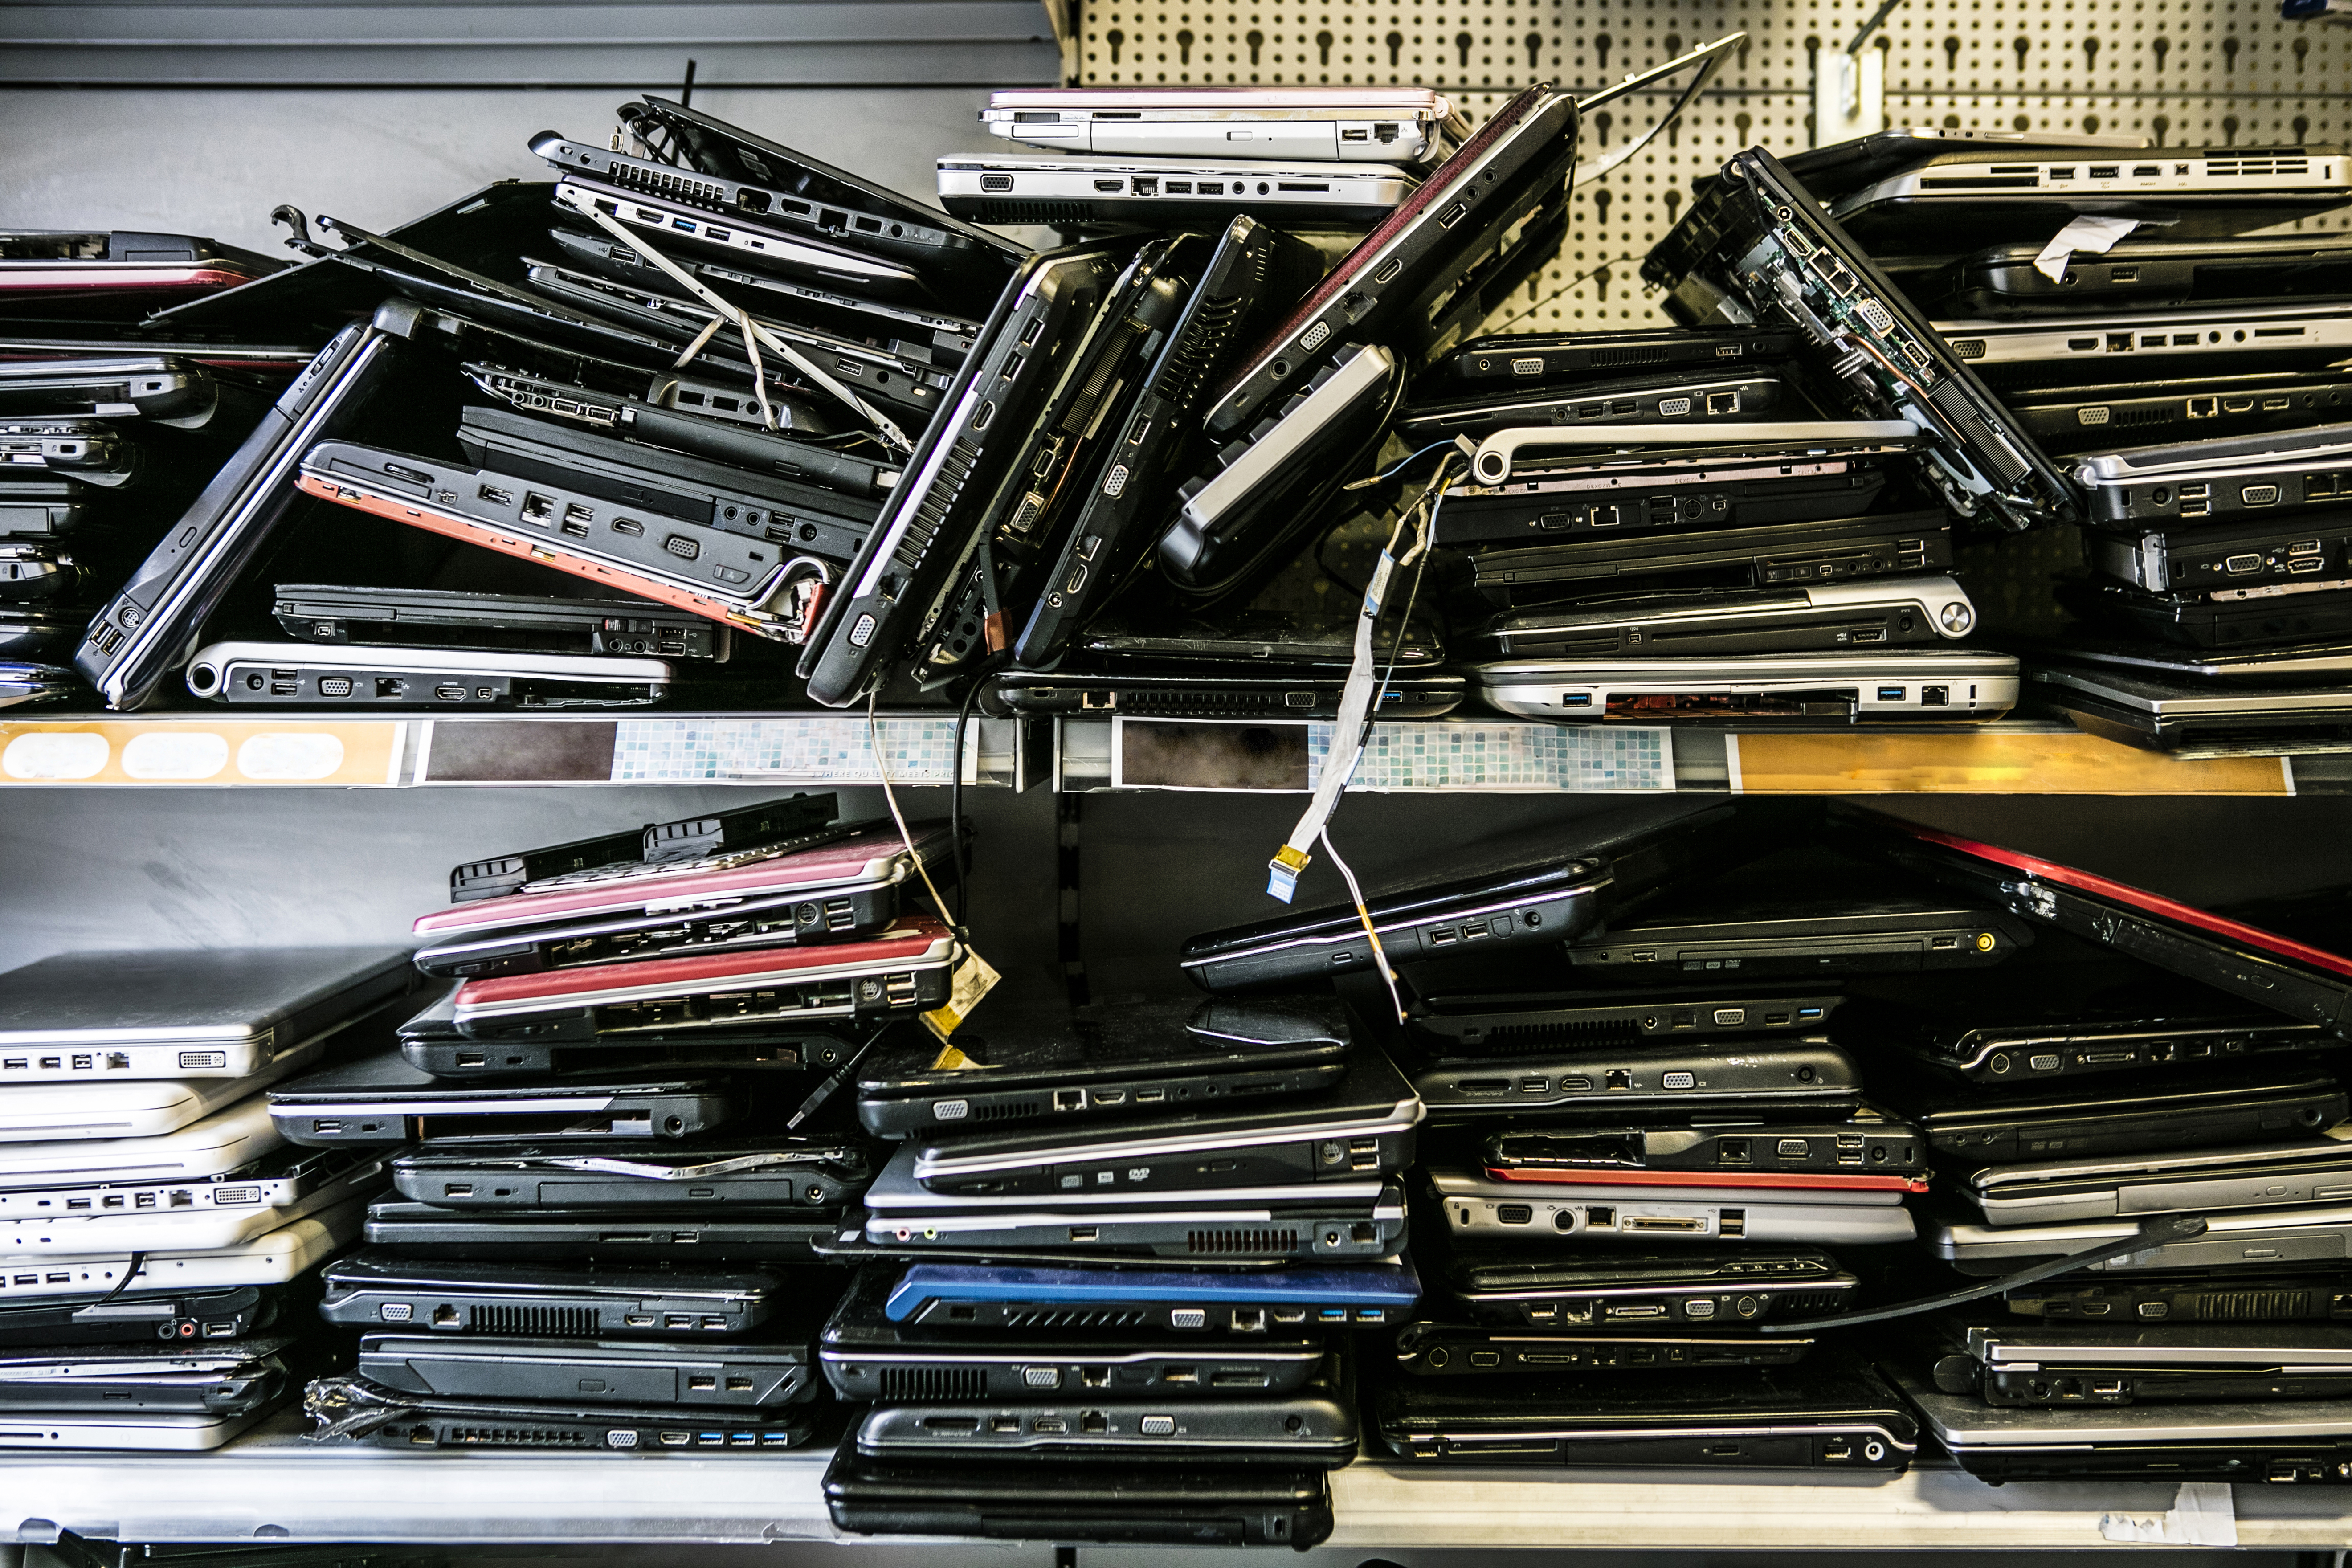 A pile of old discard laptop devices on a shop shelf